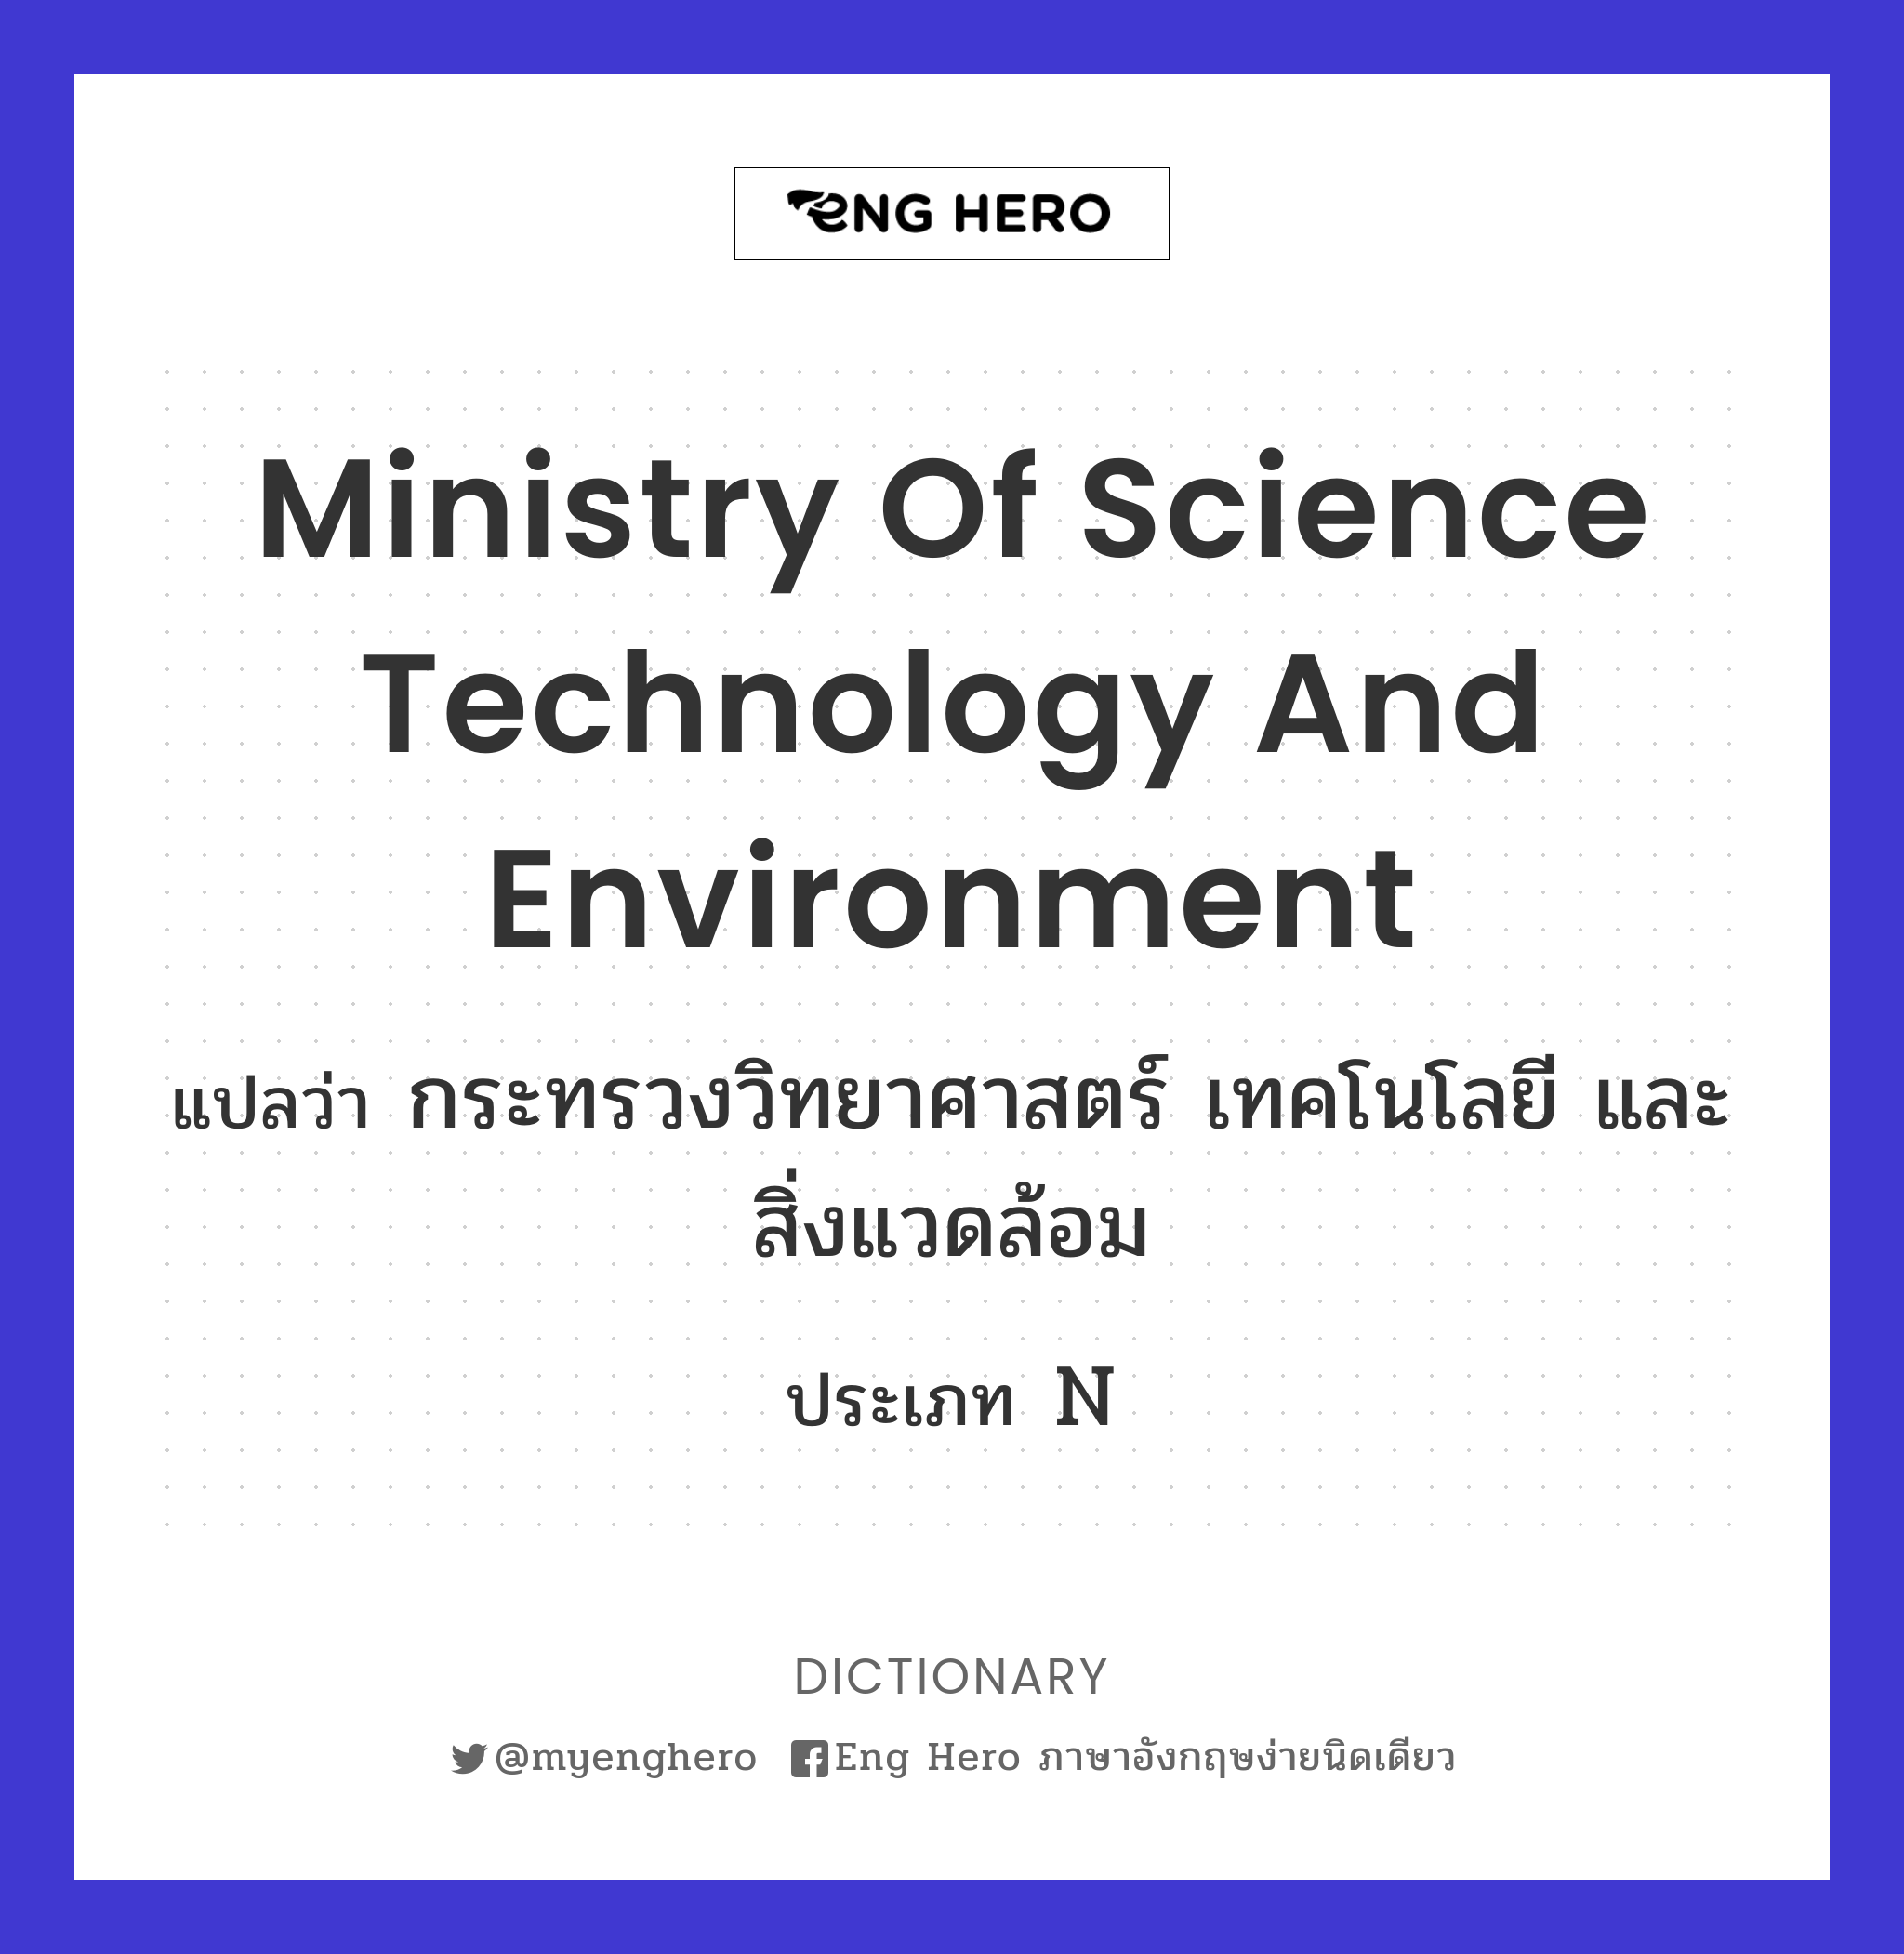 Ministry of Science Technology and Environment